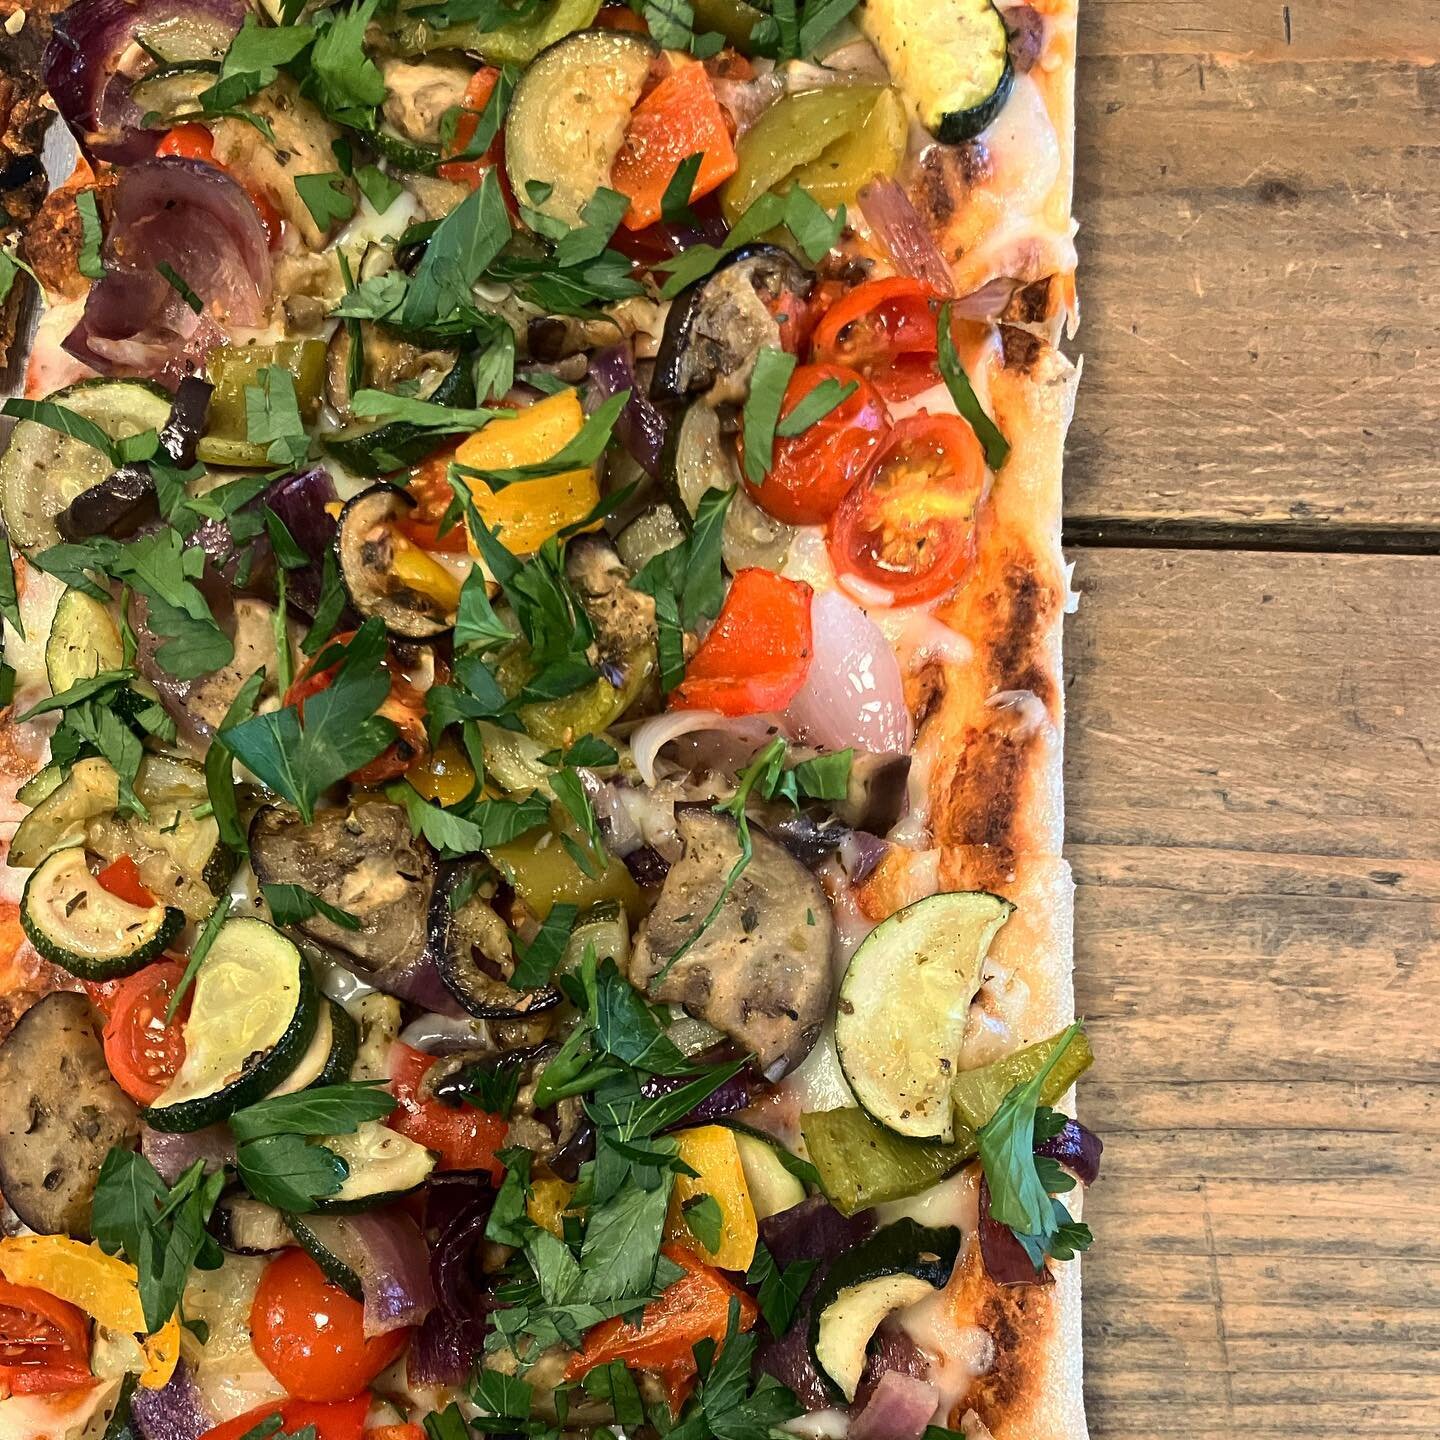 Another weekend, another new pizza! MED VEG is on the counter today, hopefully bringing some med weather with it☀️

Courgette
Cherry tomatoes
Red onion 
Aubergine 
Roasted peppers 
Parsley 

#theblock #theblockyork #pizza #york #indieyork #visityork 